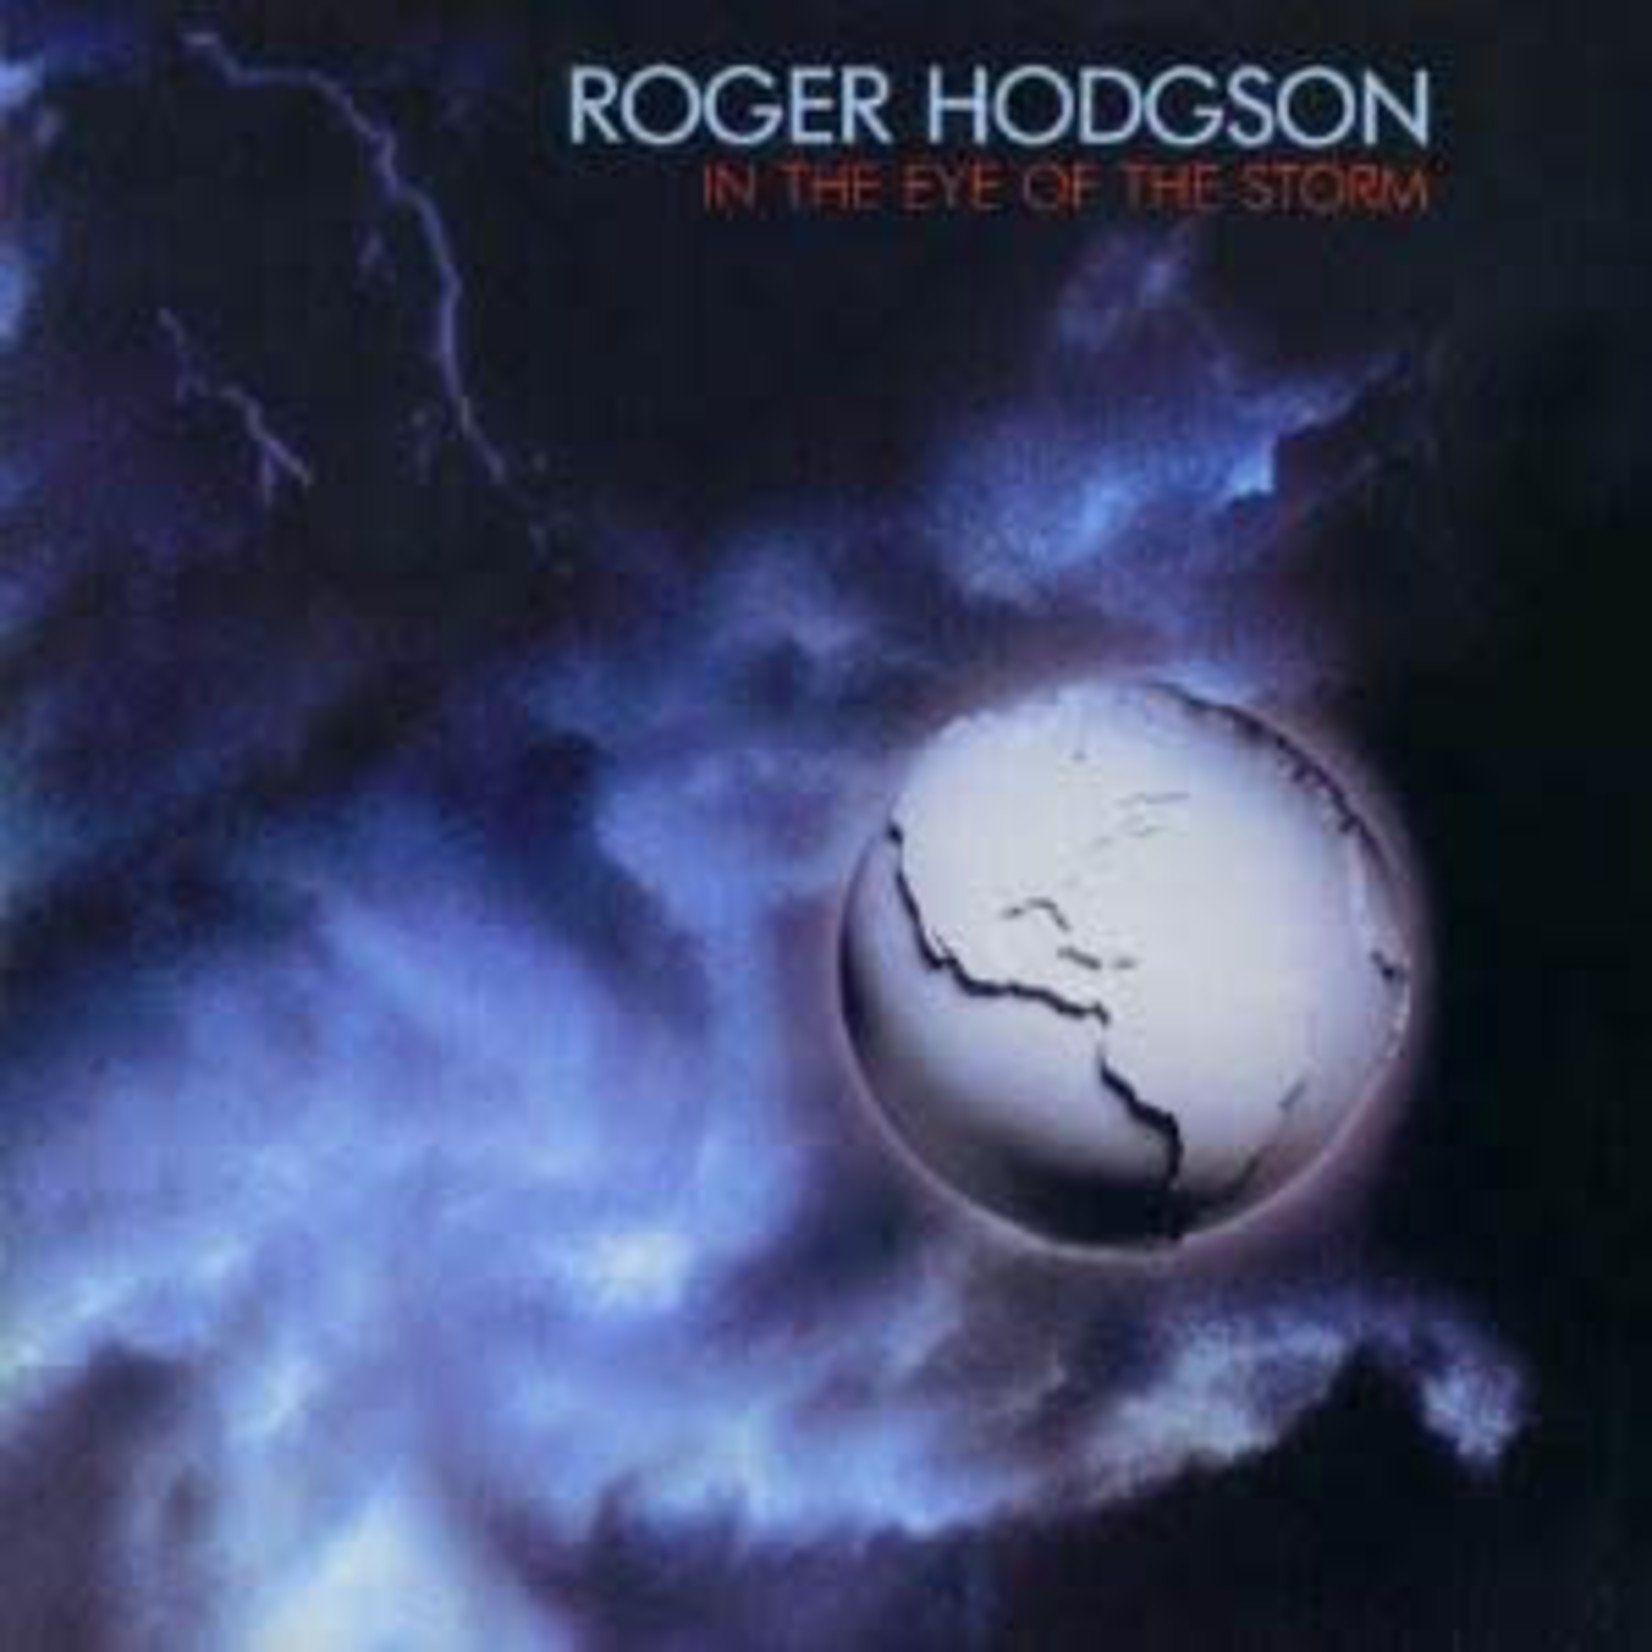 [Vintage] Roger Hodgson - In the Eye of the Storm